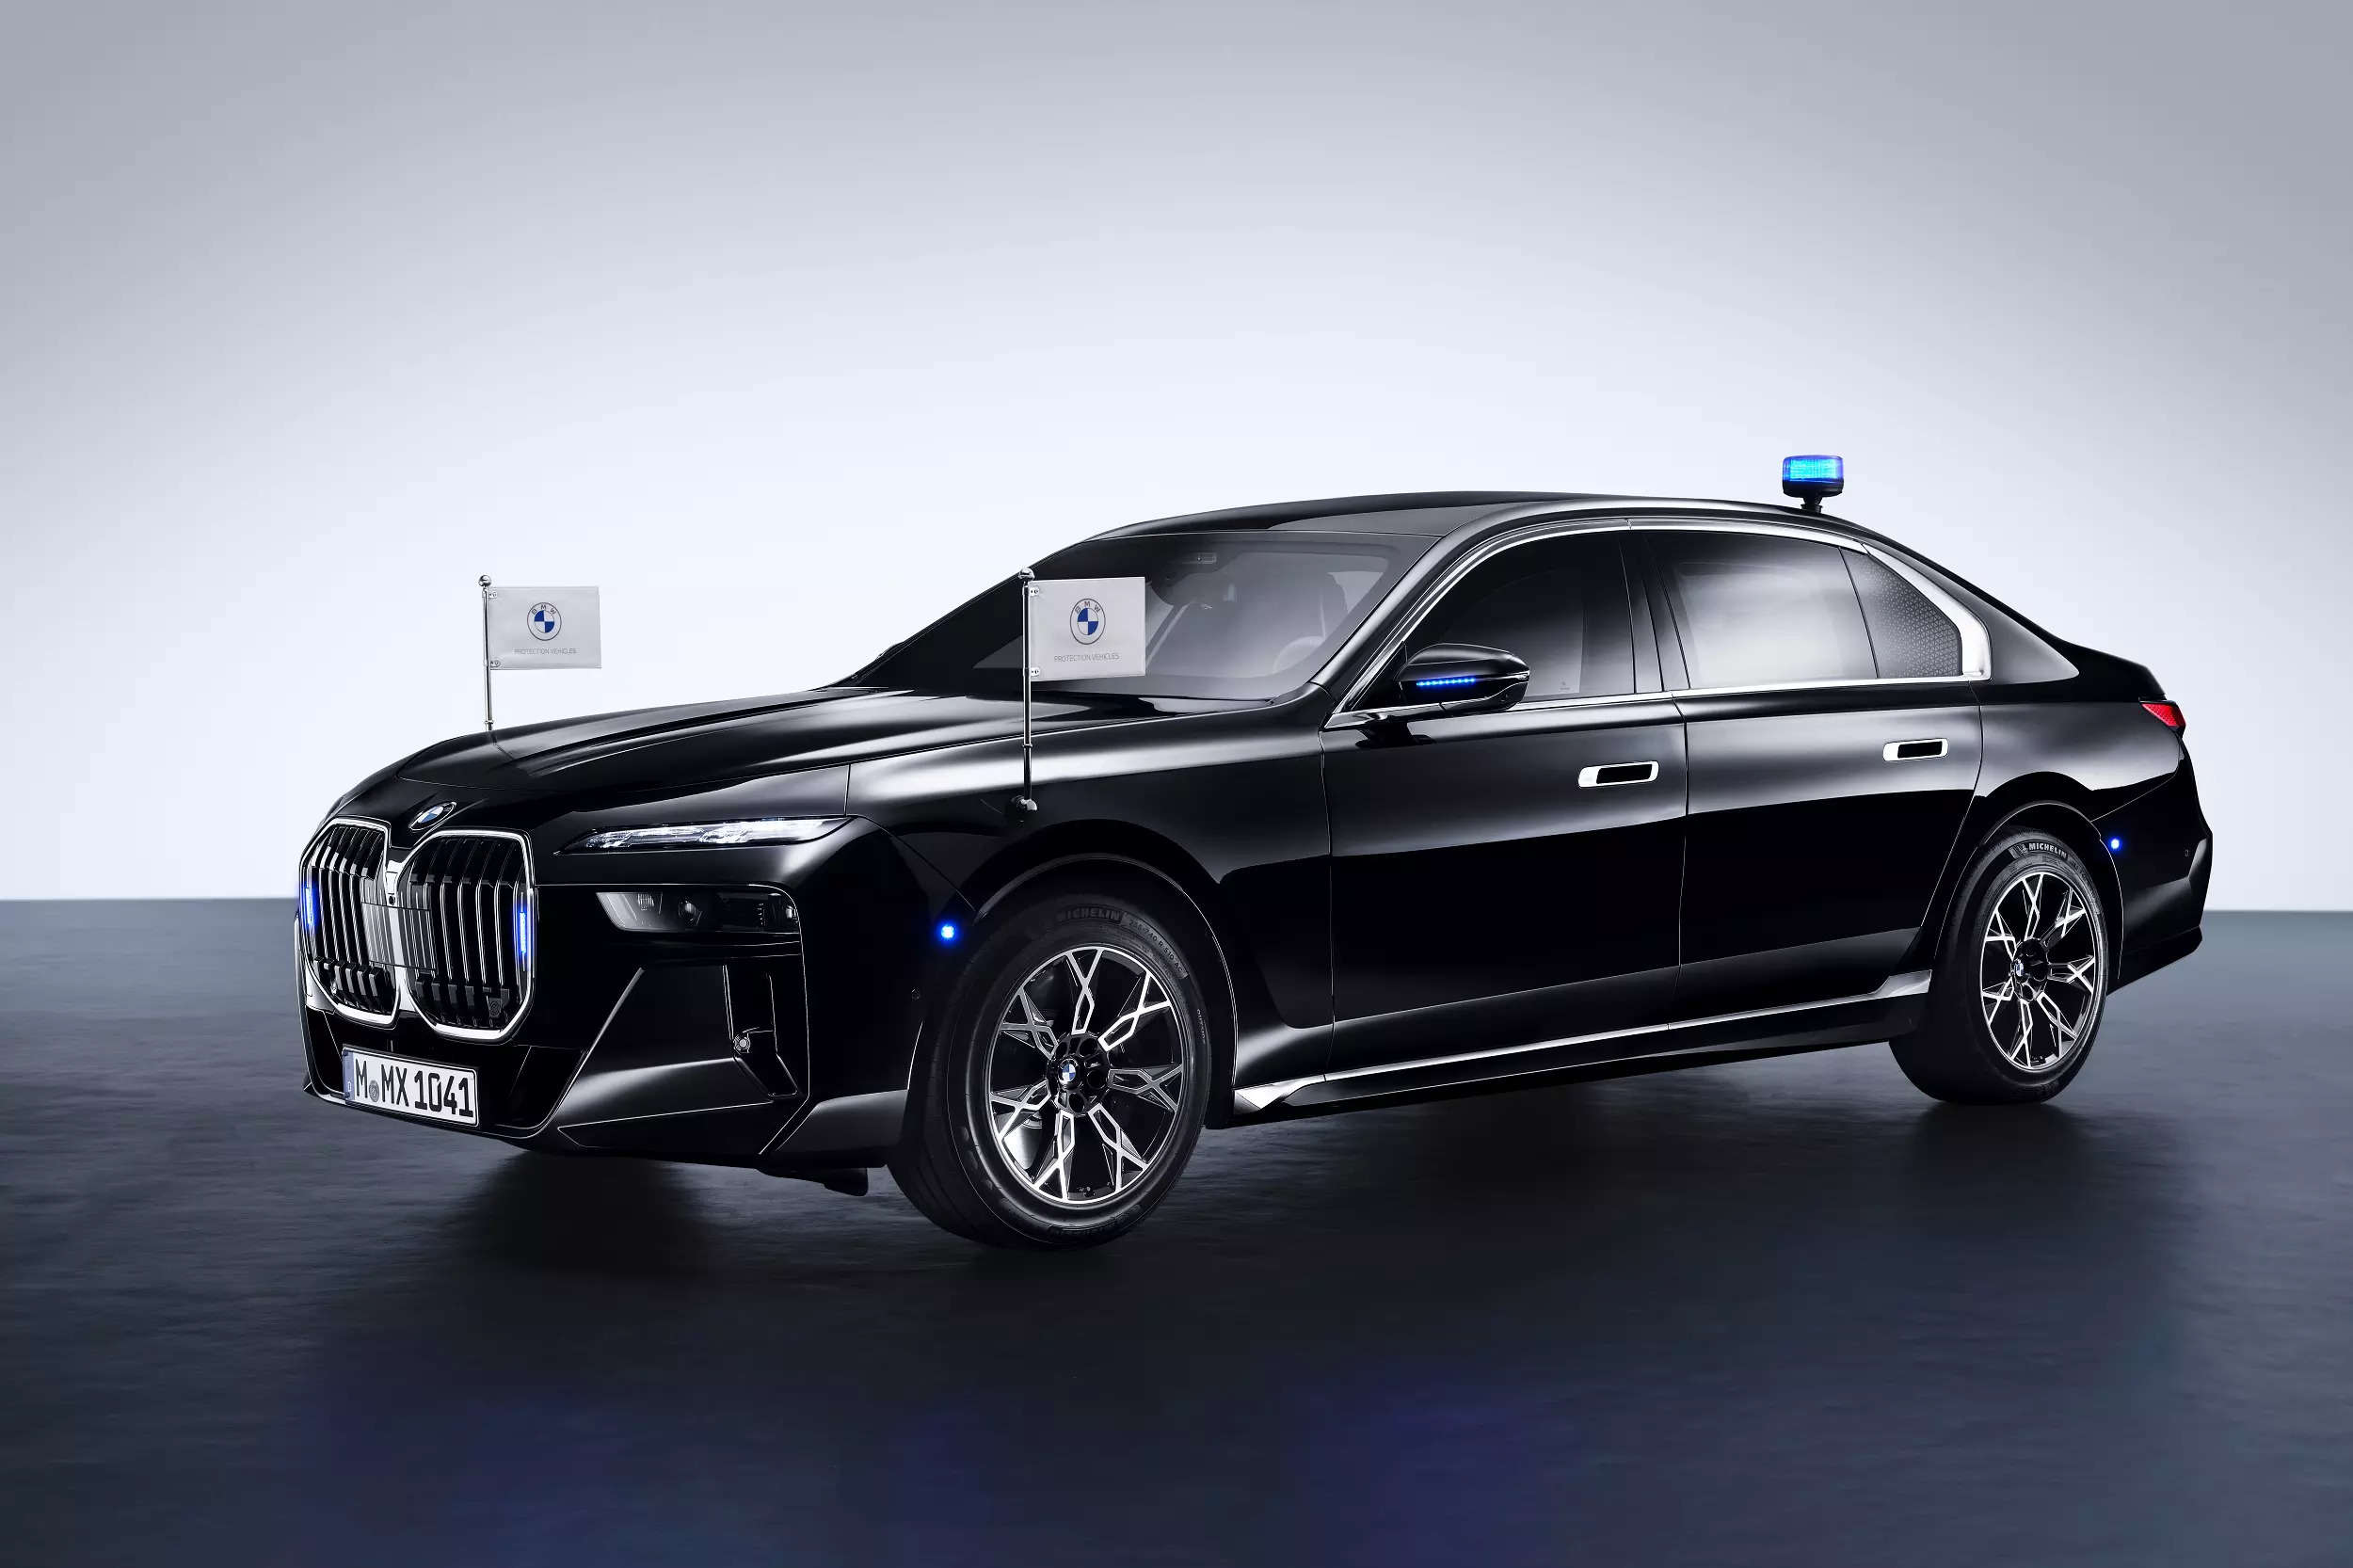 <p>The new BMW 7 Series Protection offers customised protection from attacks with firearms or explosives for at-risk individuals.</p>